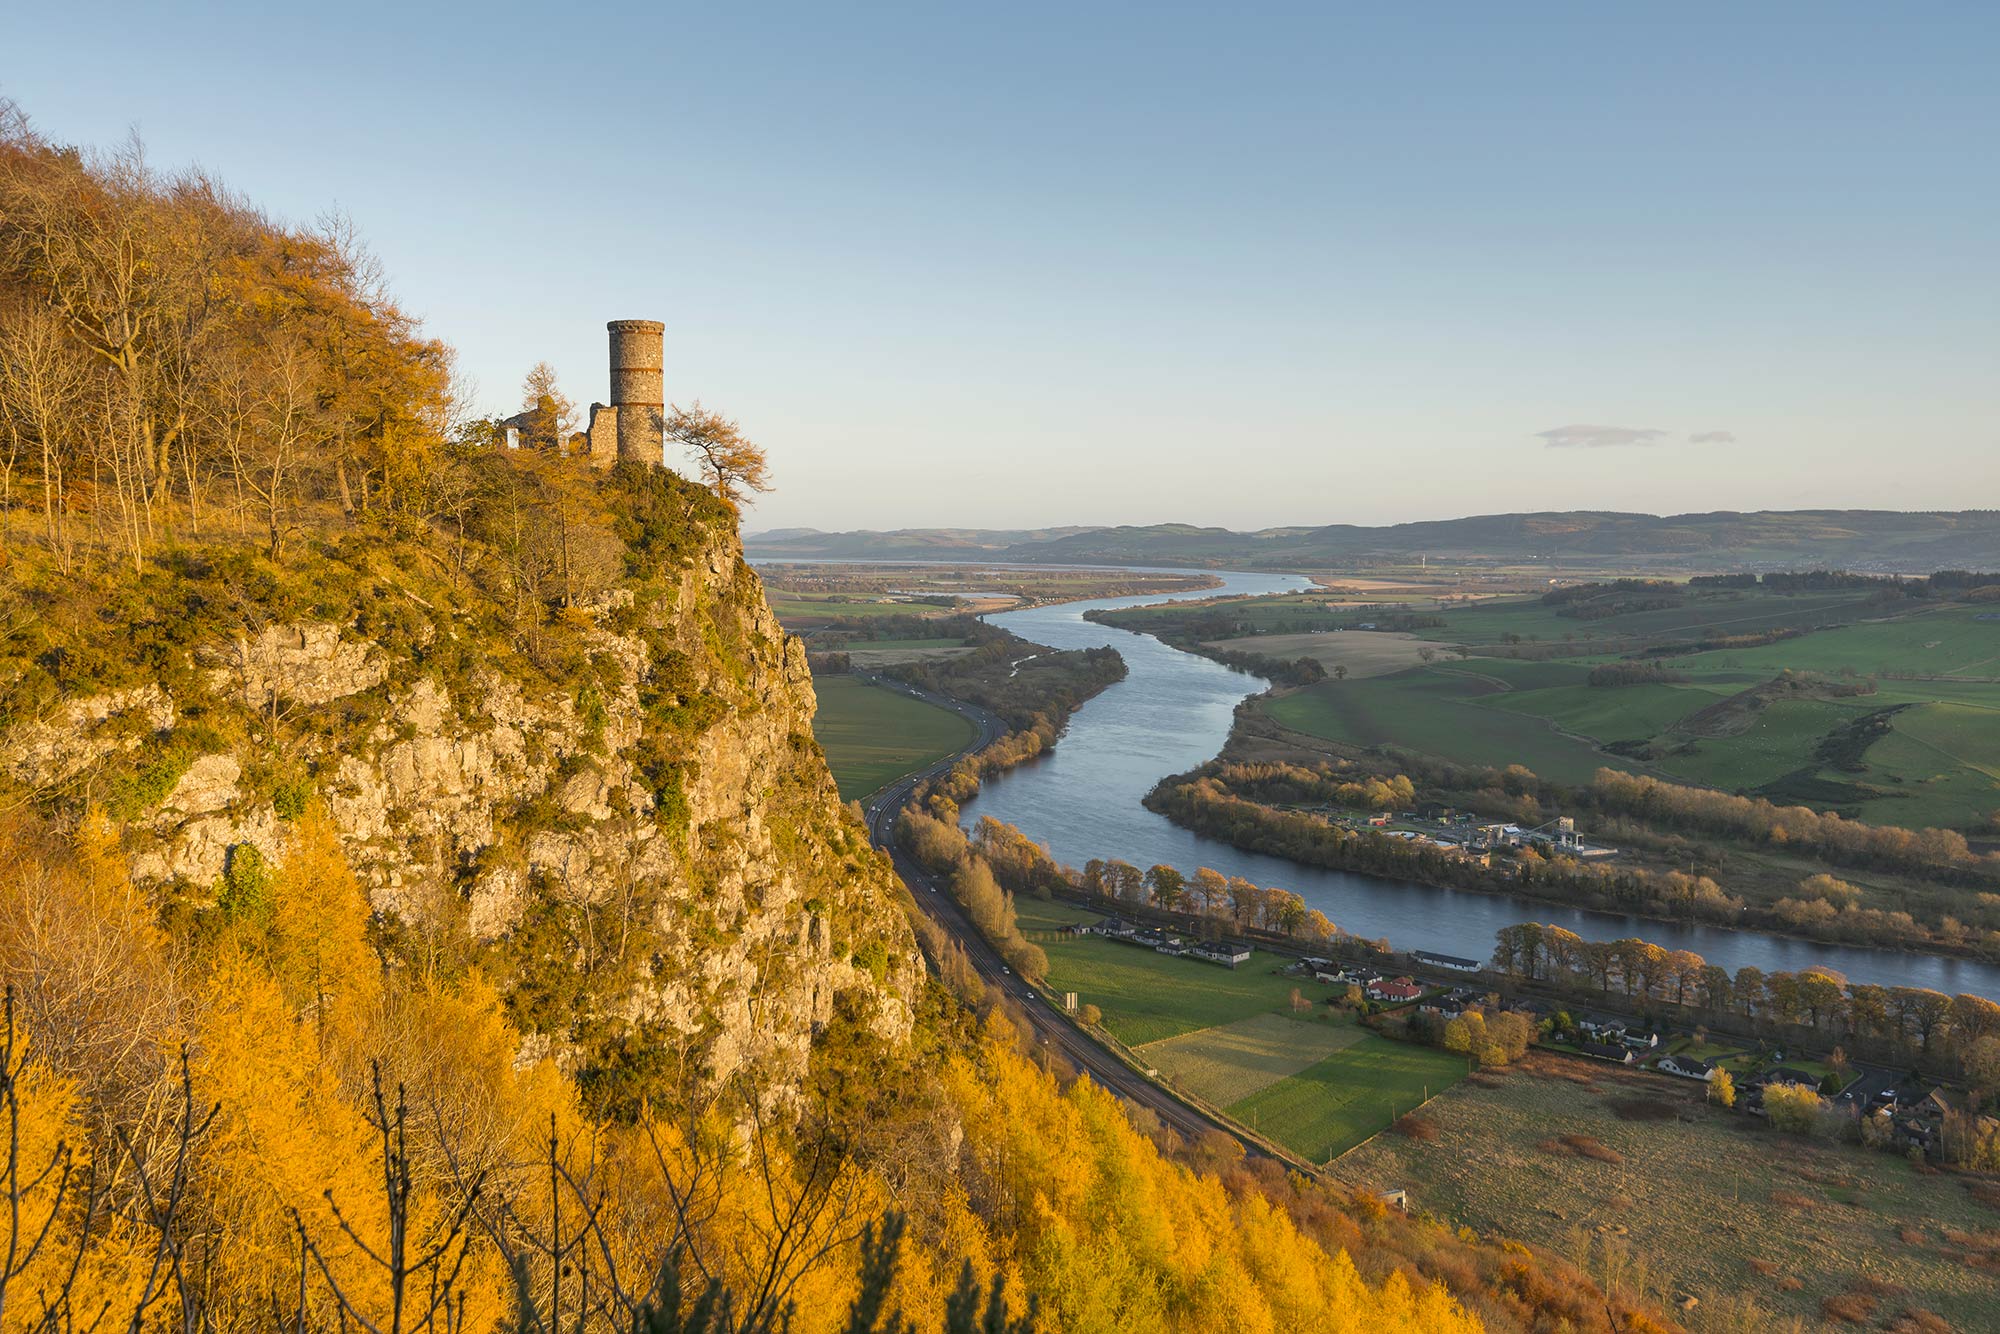 Kinnoull hill s Tower, with the meandering River Tay in the background